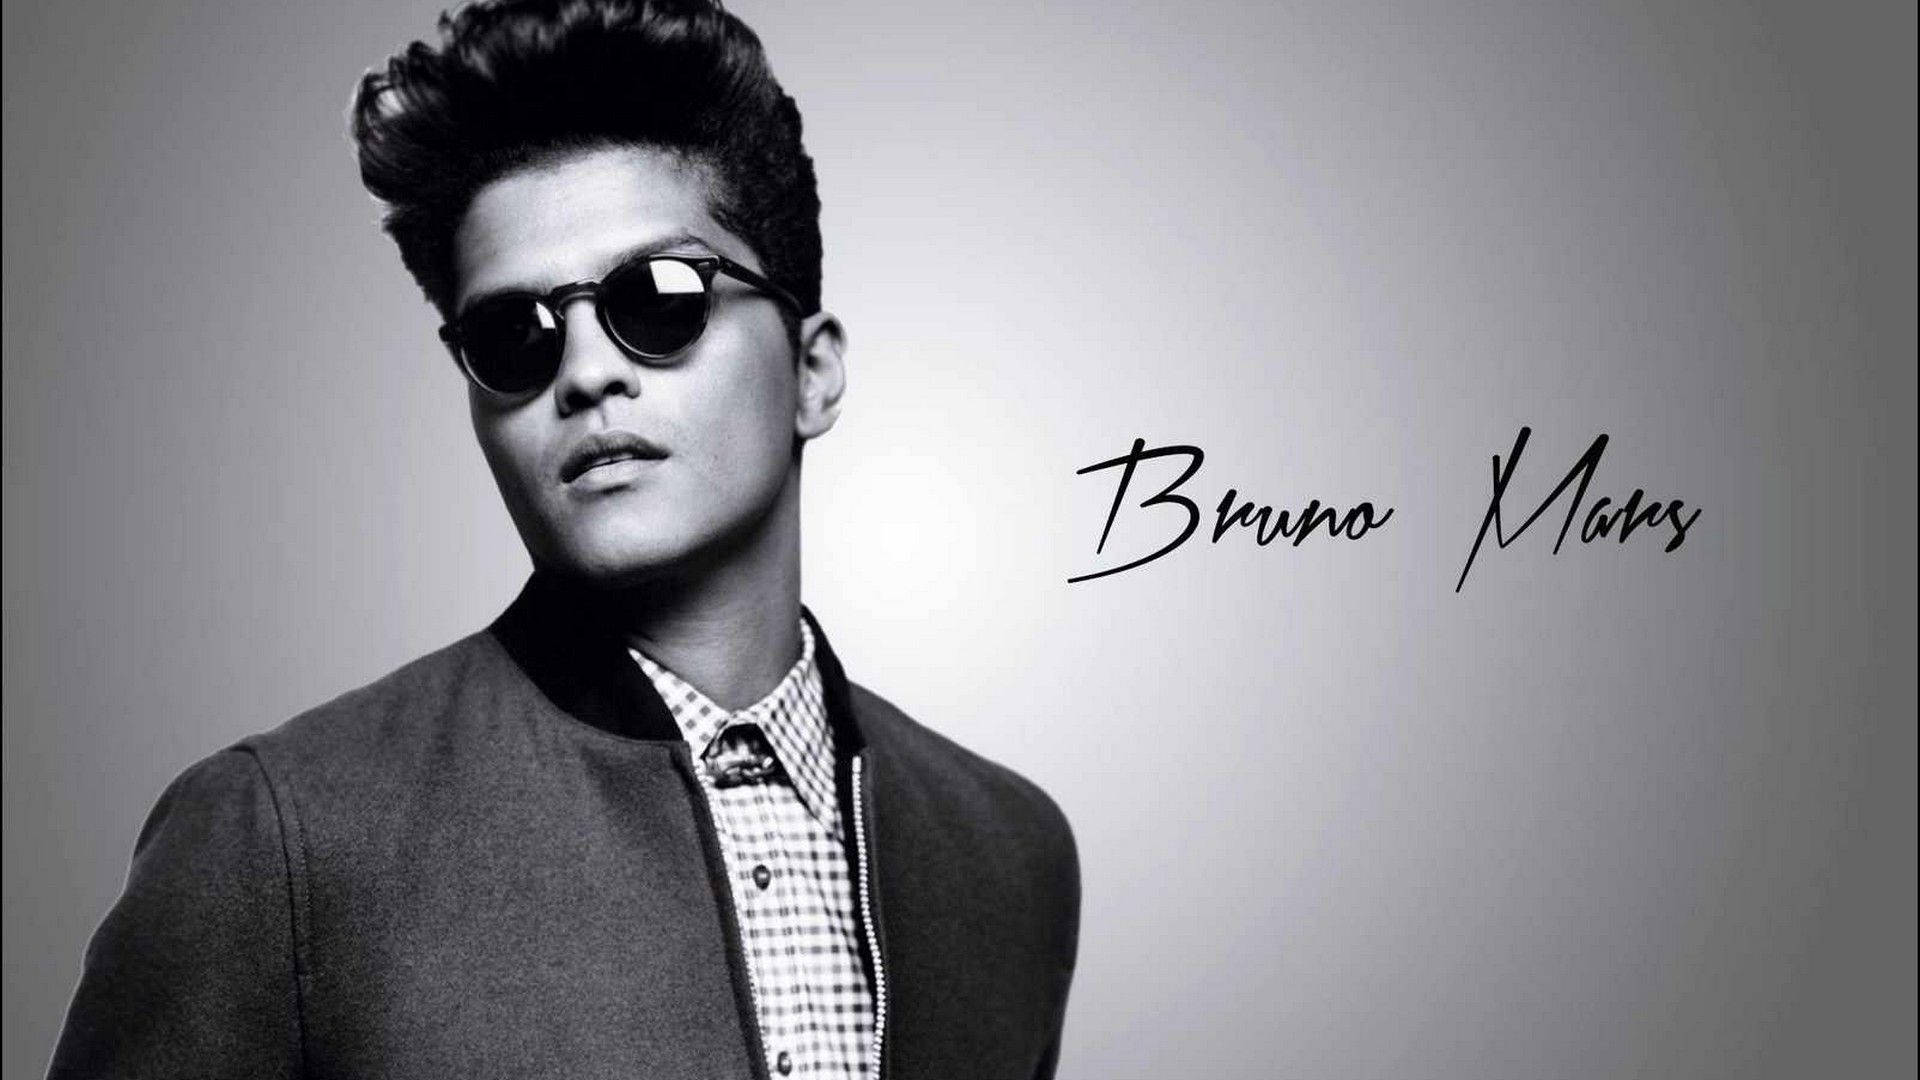 Bruno Mars All Dressed Up In An Eye-catching Outfit Background